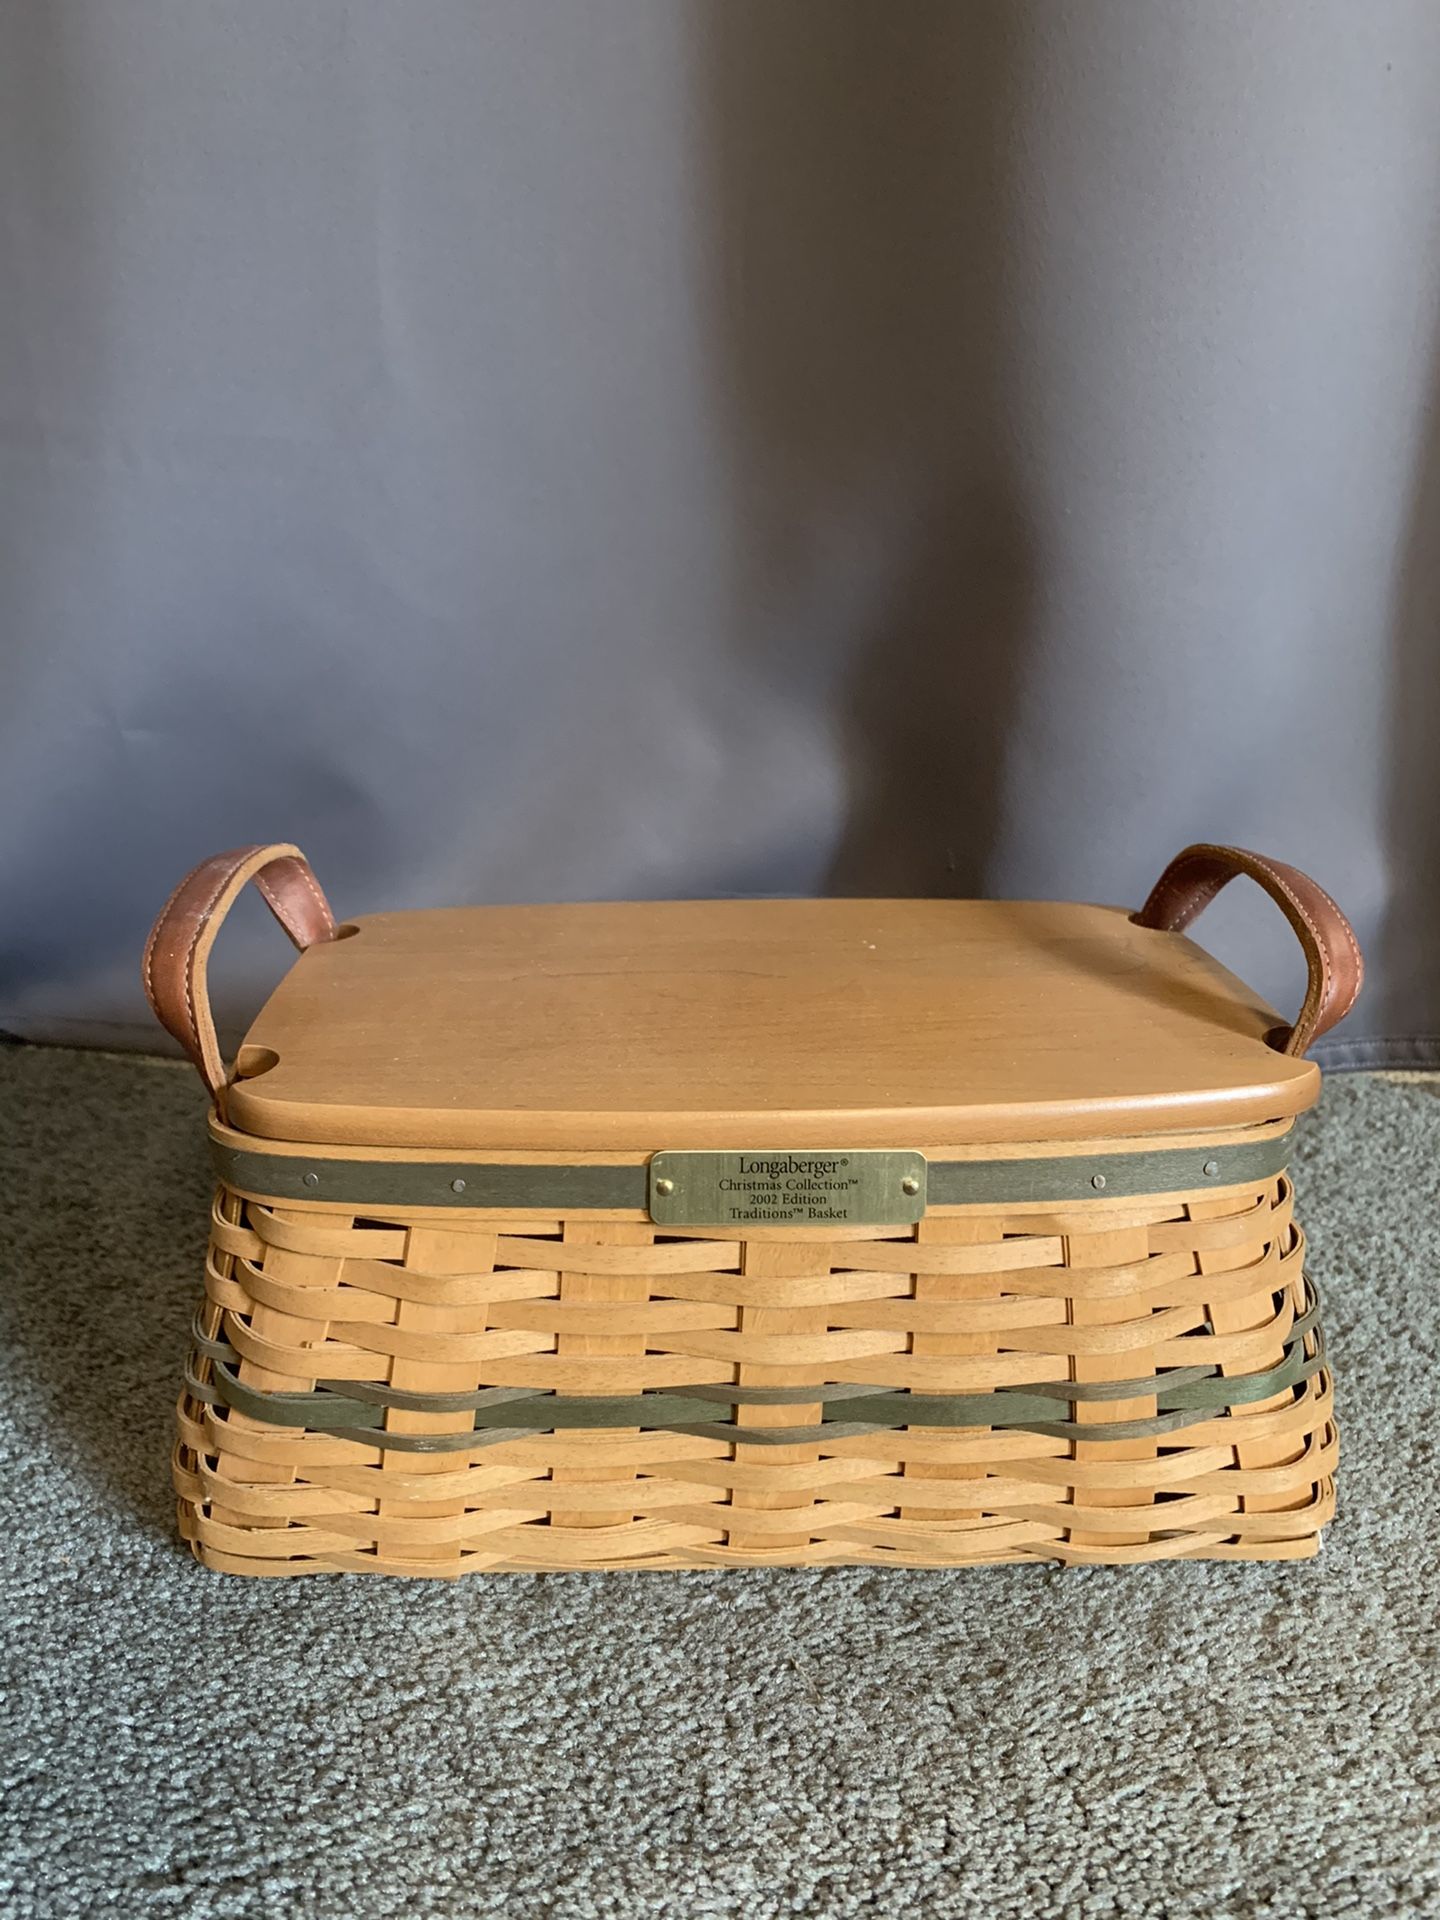 Longaberger Christmas Collection 2002 Edition Traditions Basket